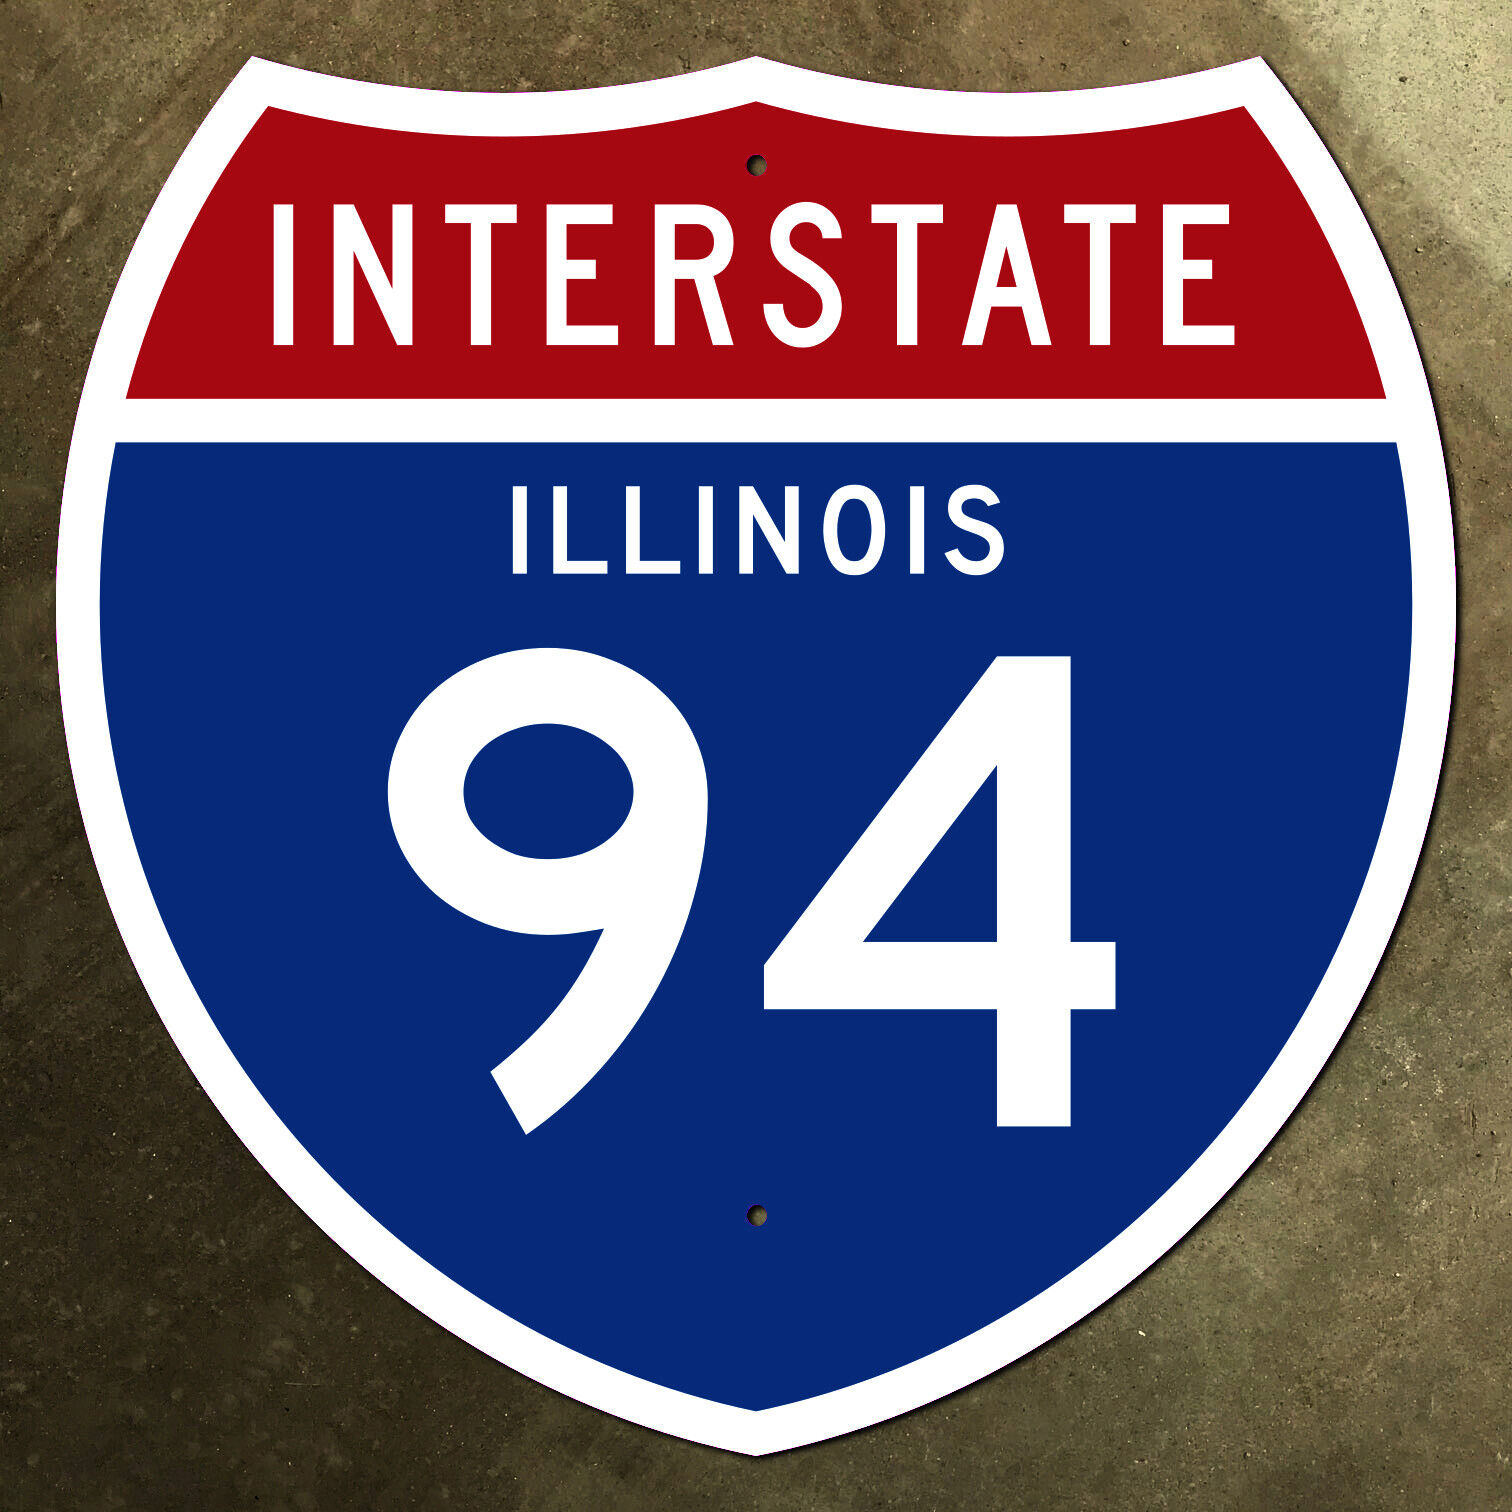 Illinois interstate route 94 highway marker road sign Chicago Dan Ryan 12x12